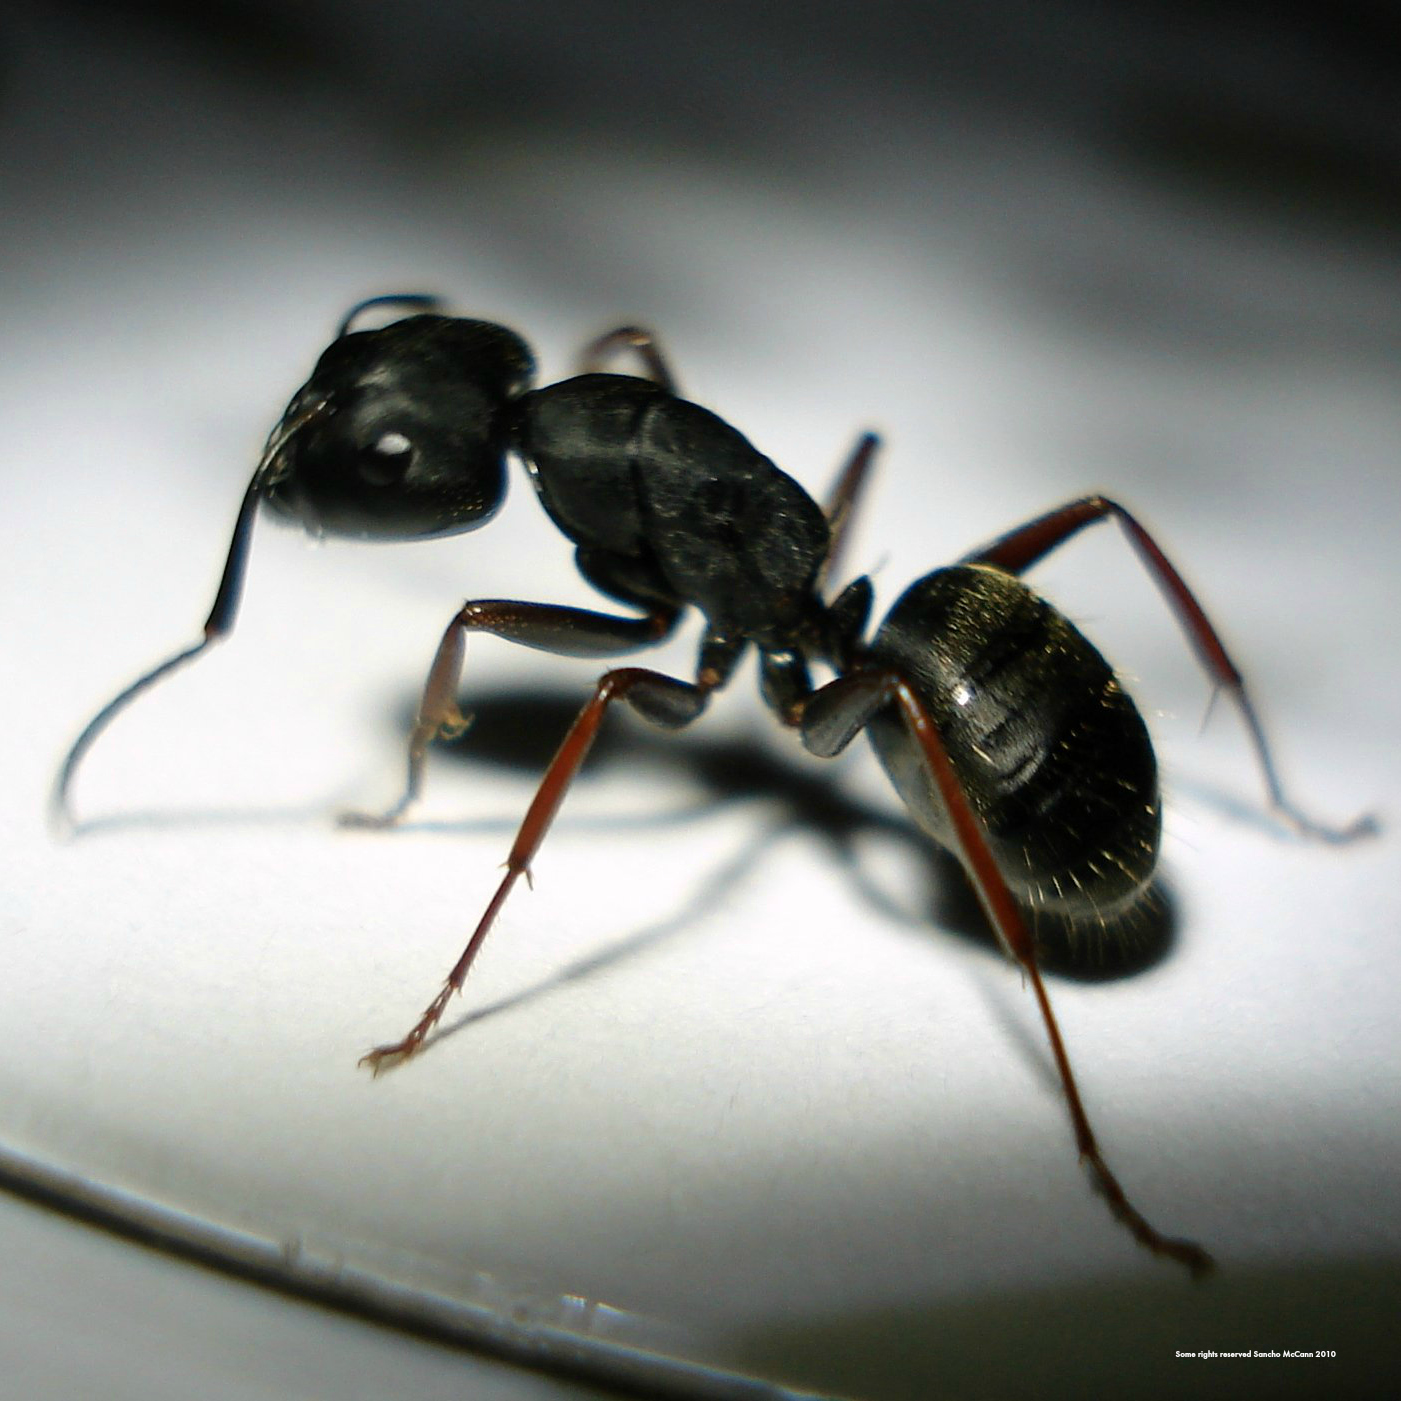 How to get rid of ants naturally without using toxic poisons